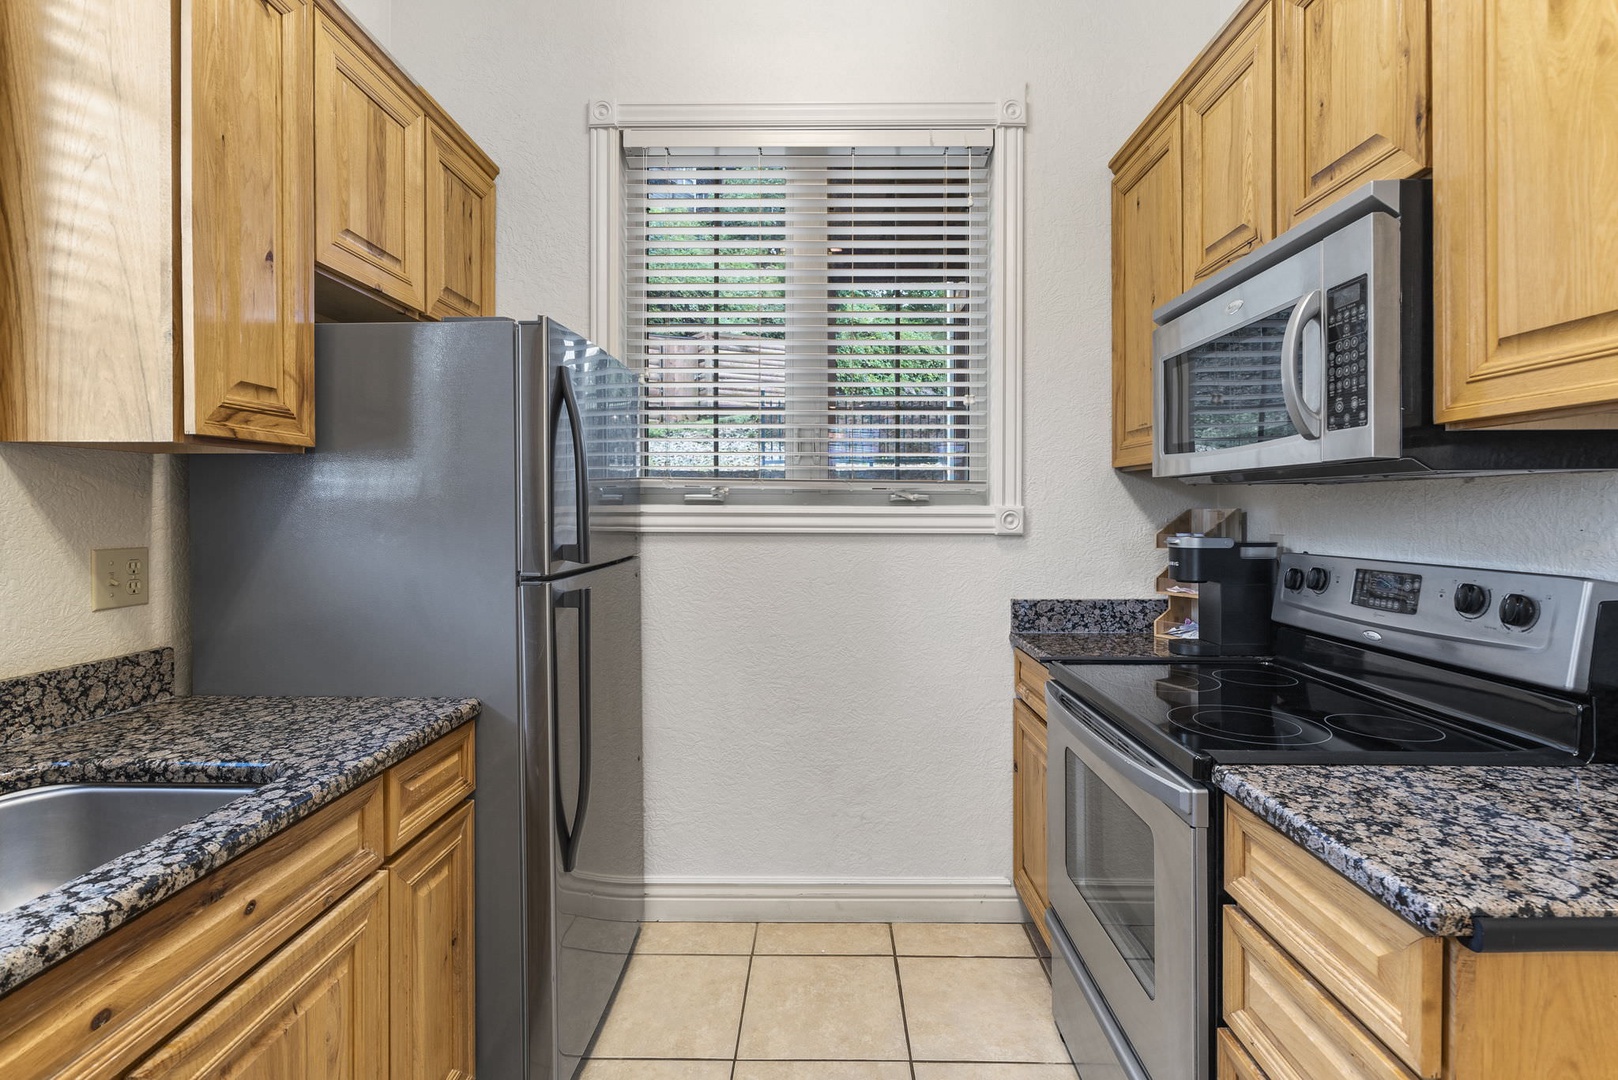 Enjoy all the comforts of home in the well-equipped kitchen